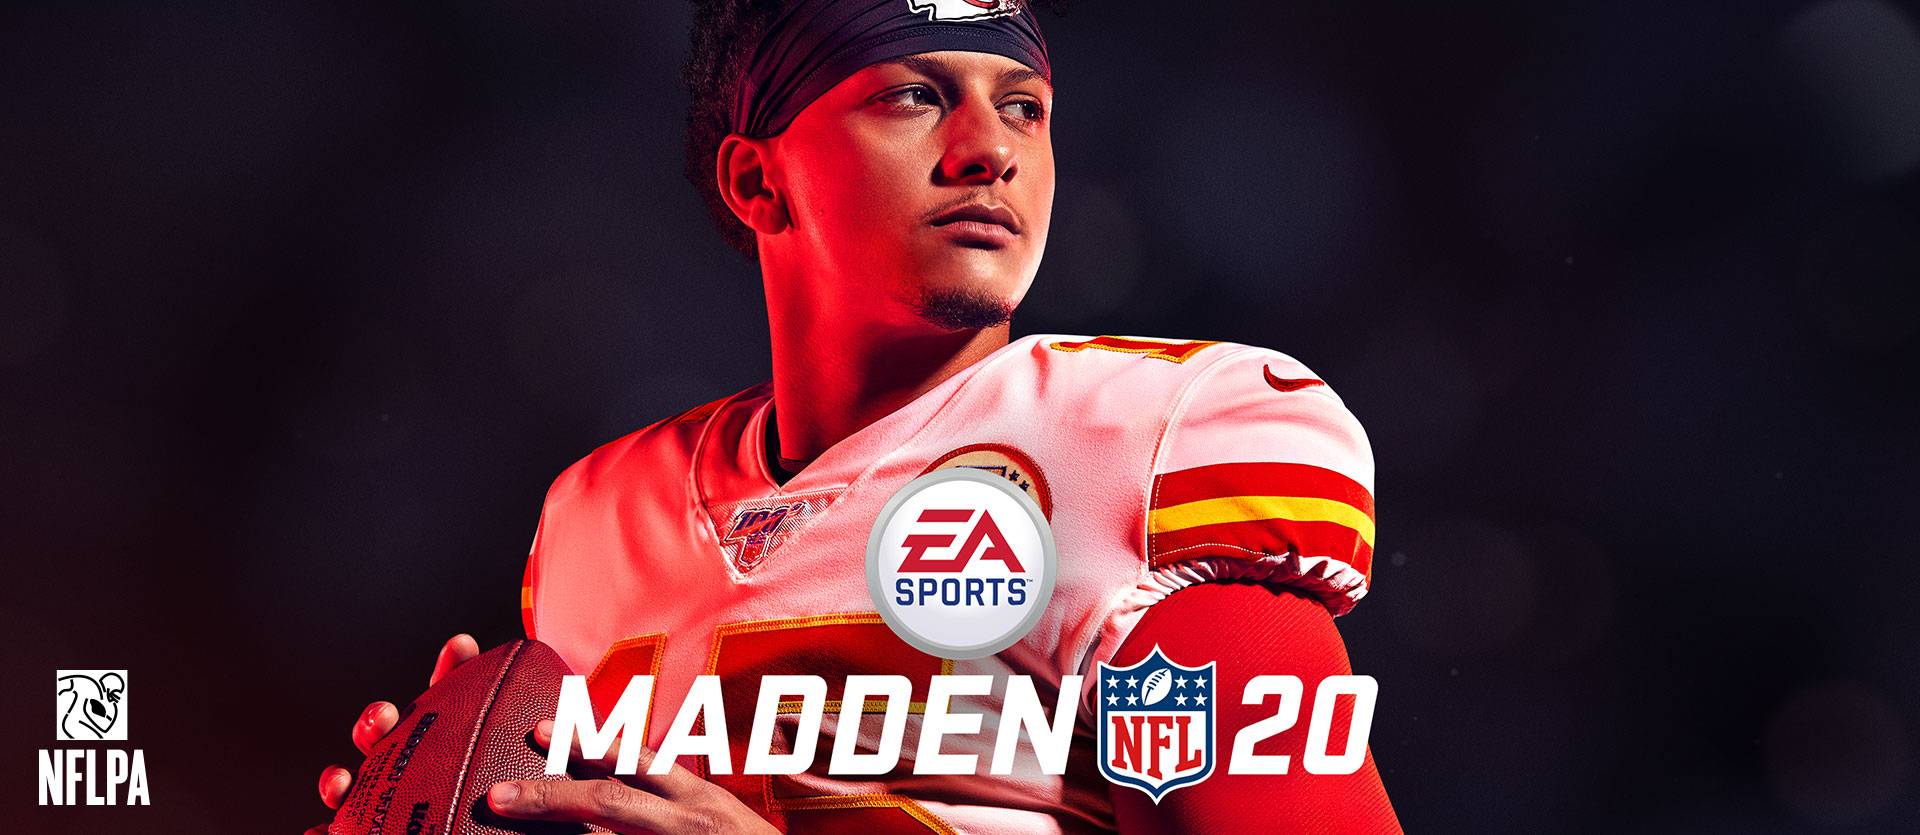 Madden NFL 20 News: Release Date, cover athlete, and Pre-order bonuses